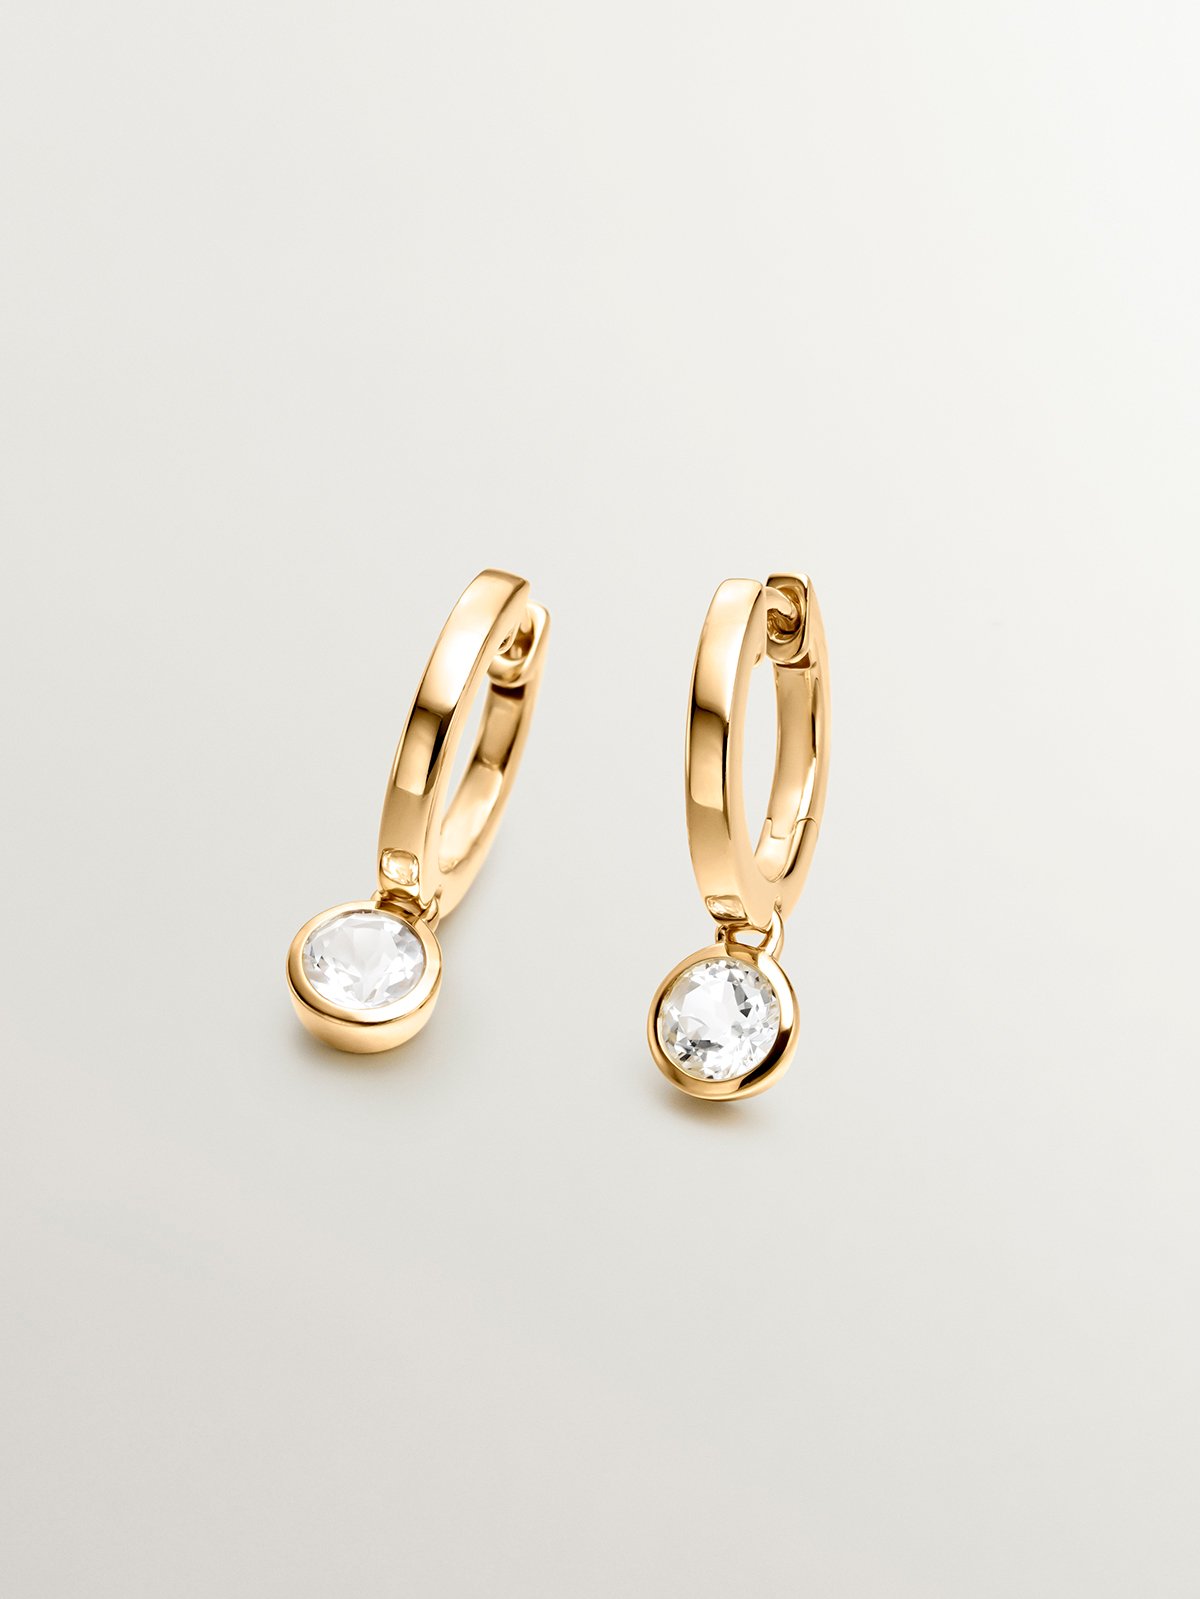 Small hoop earrings made from 925 silver, plated in 18K yellow gold with white topaz